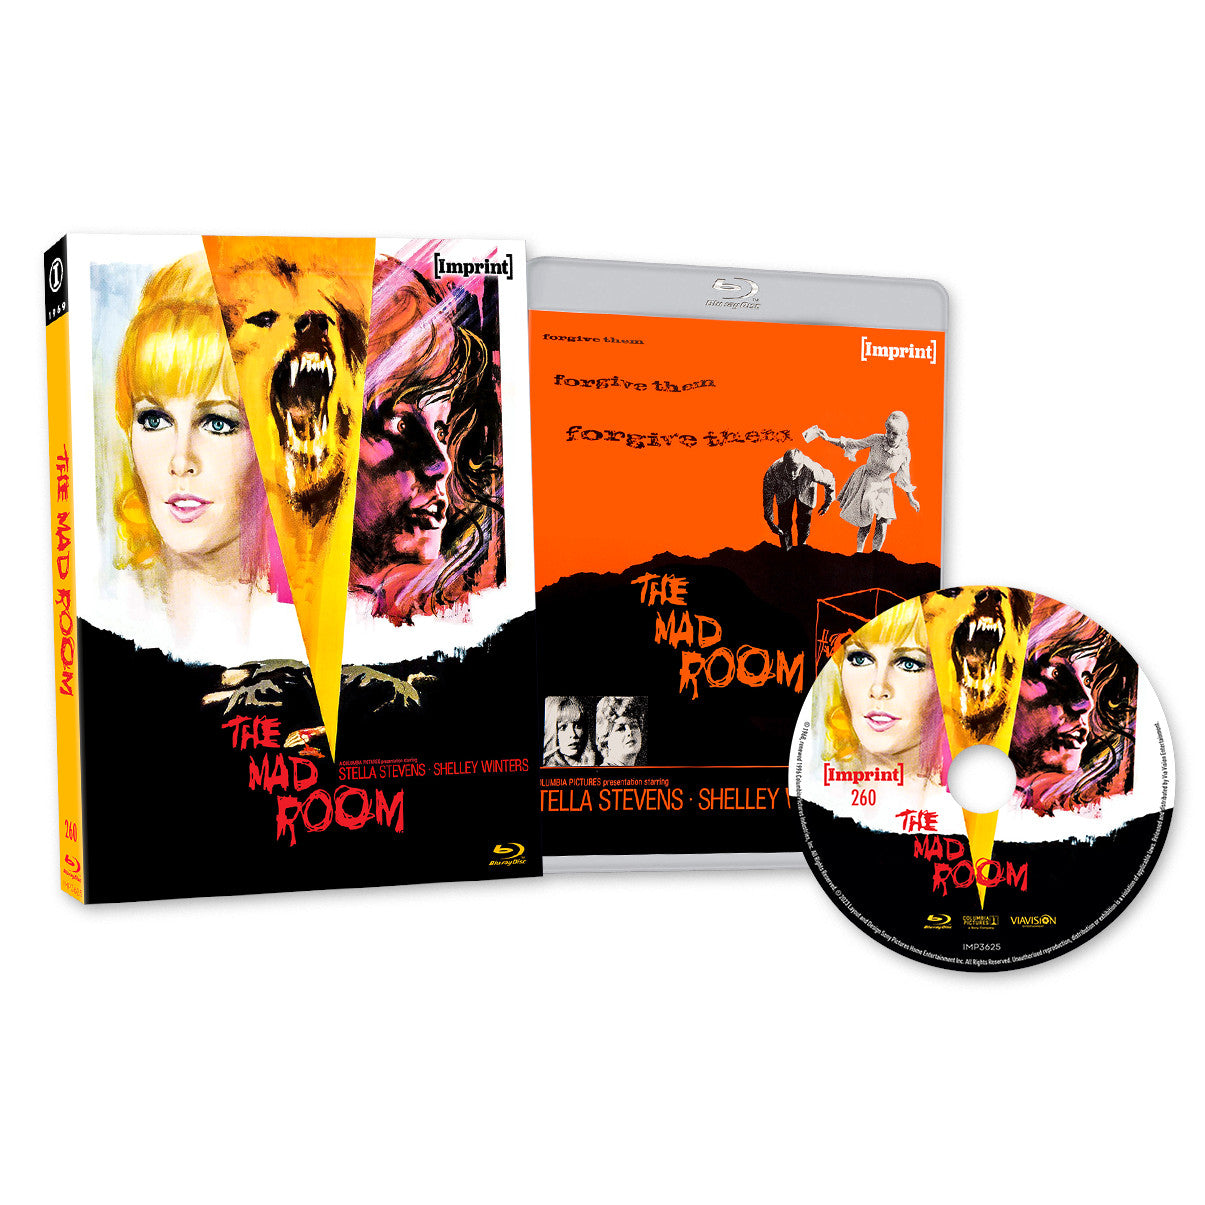 The Mad Room (Imprint #260 Special Edition) Blu-Ray